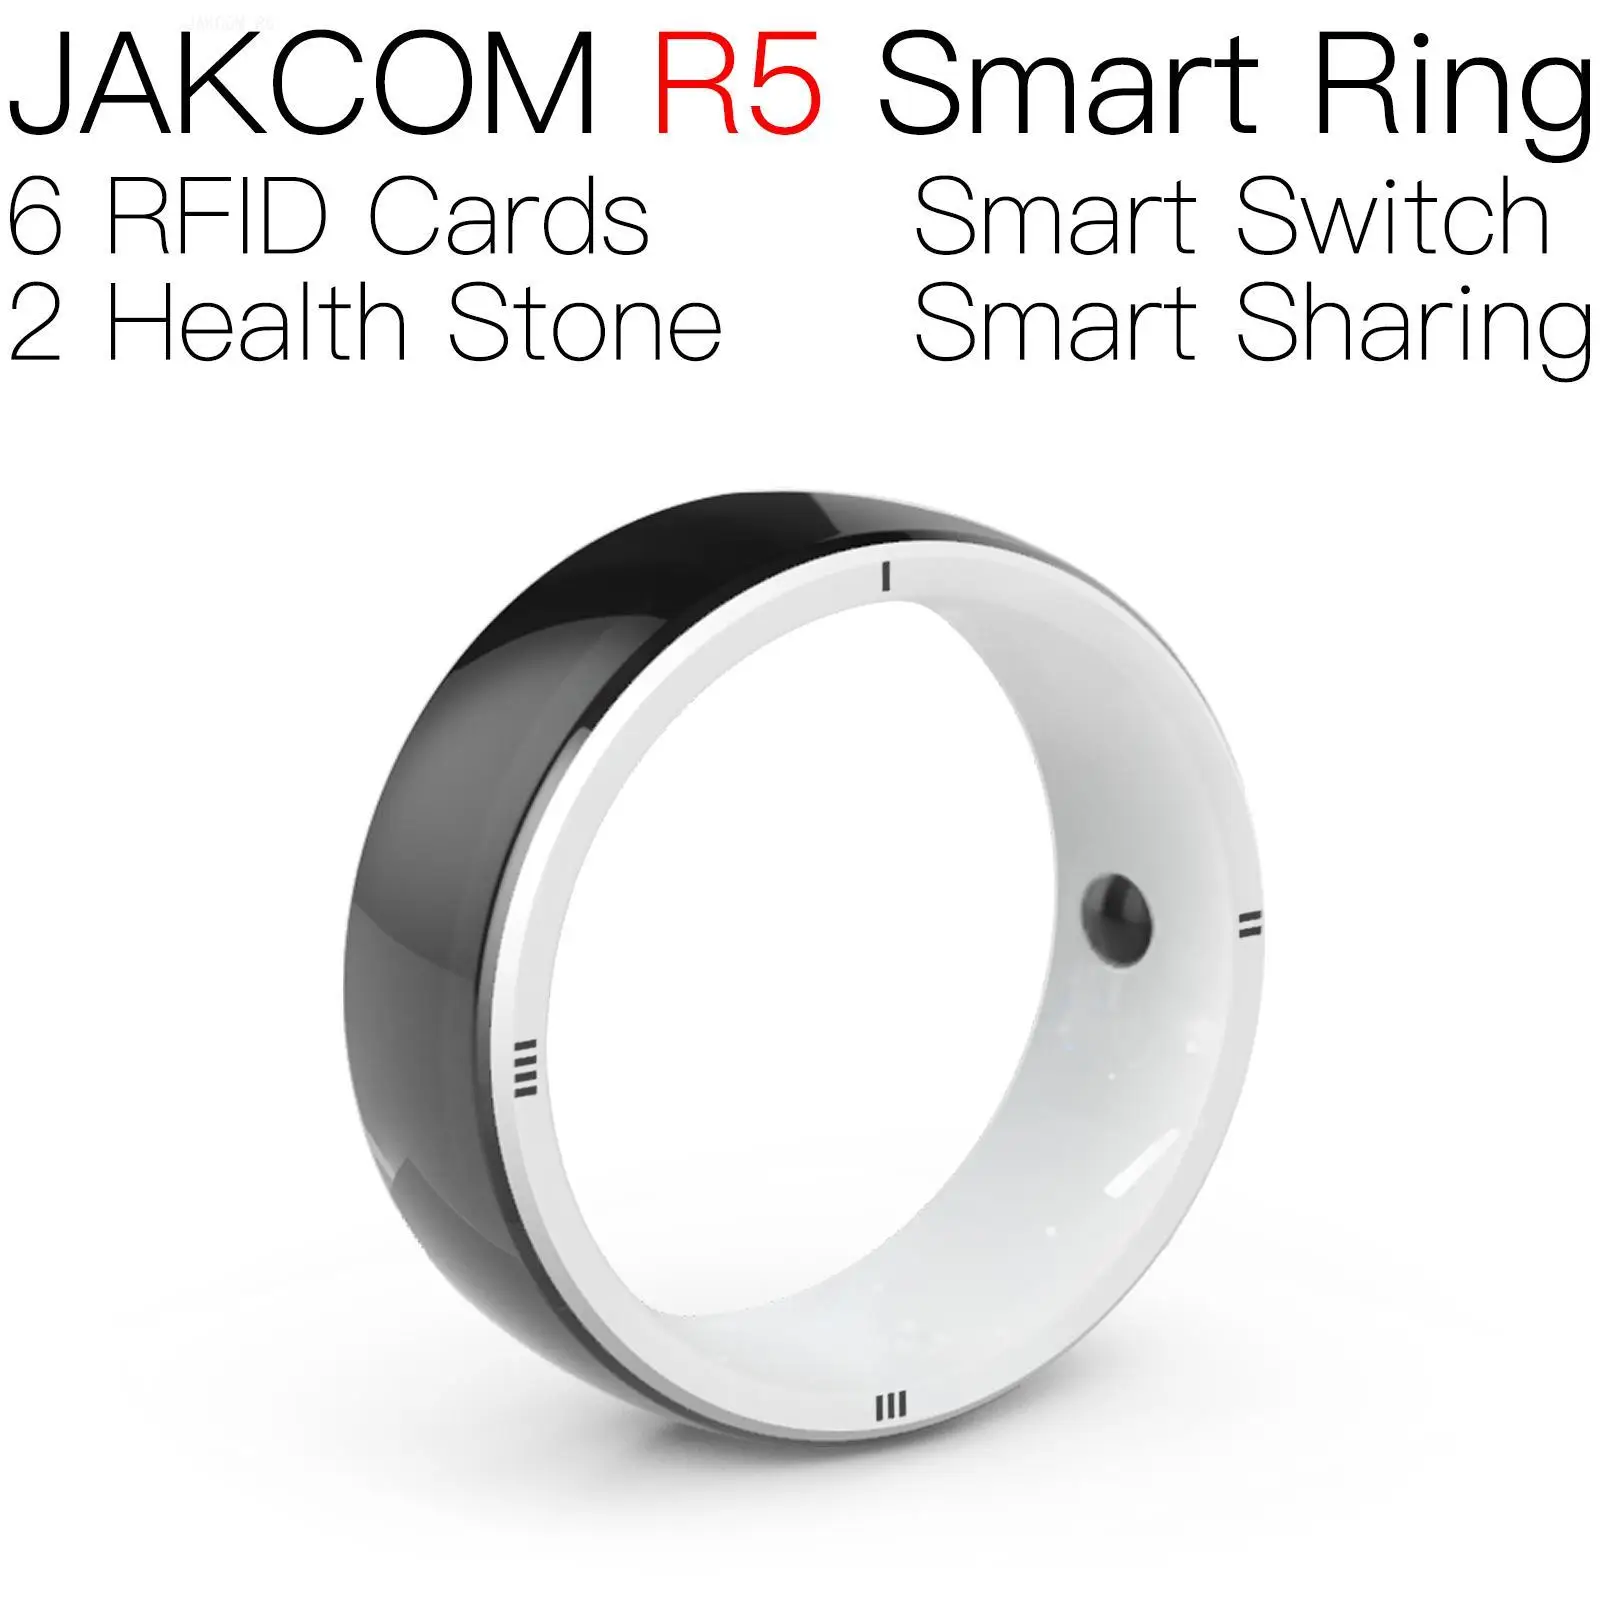 

JAKCOM R5 Smart Ring Best gift with uhf rfid nfc transparent coin card classic 1k uid writable key chip calculator